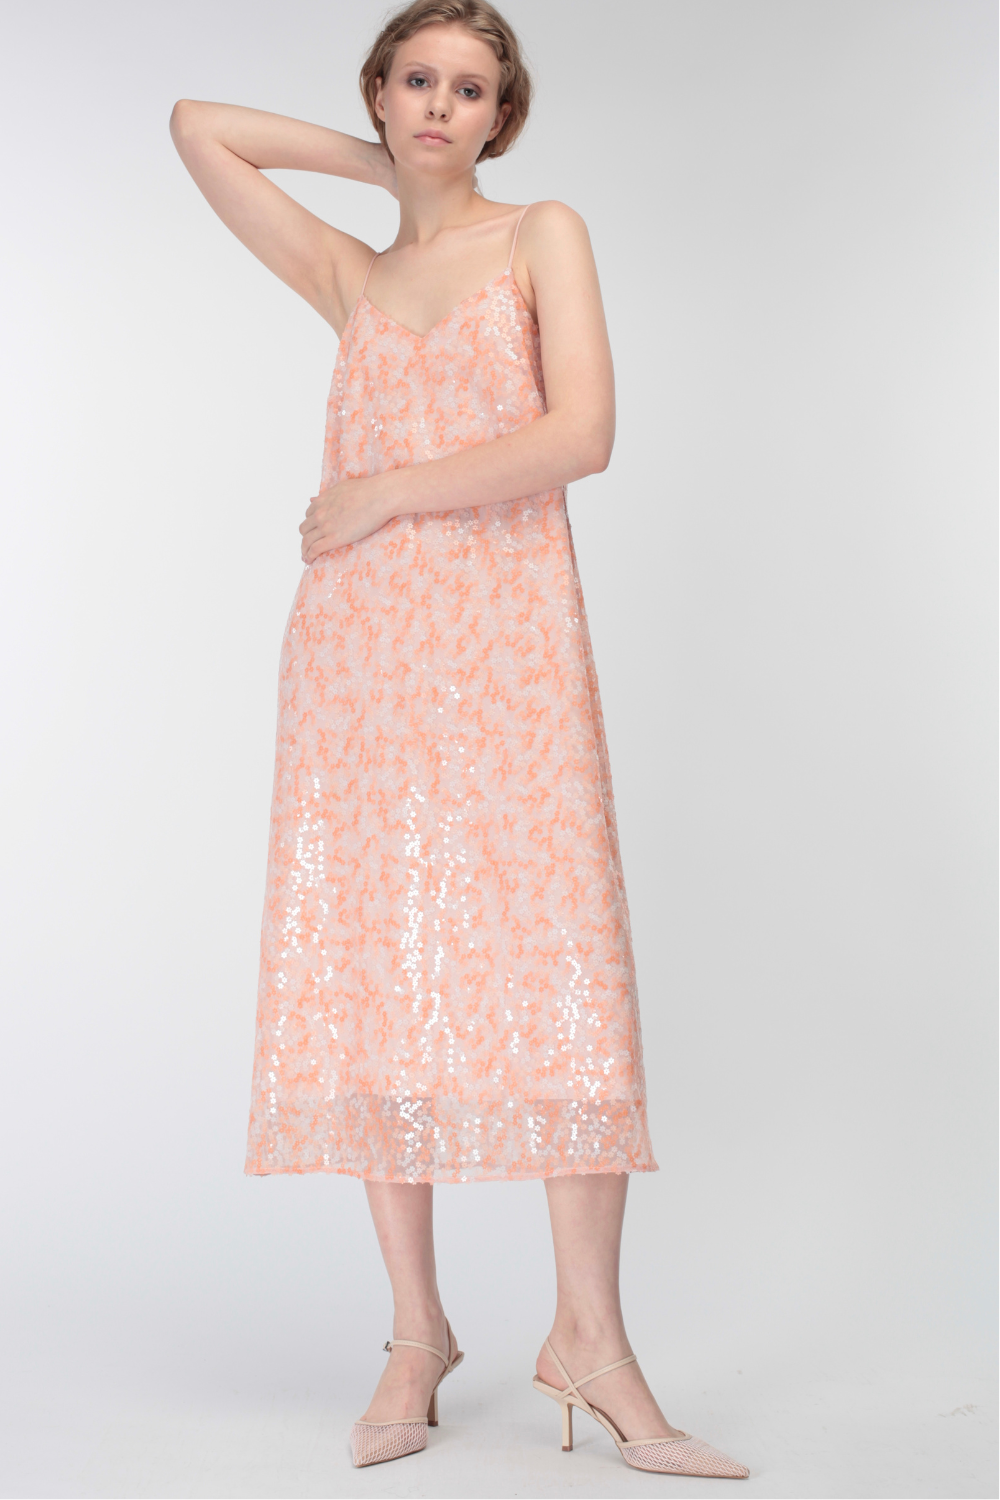 Dress with thin straps with sequins, peach (MissSecret) DR-031-pink